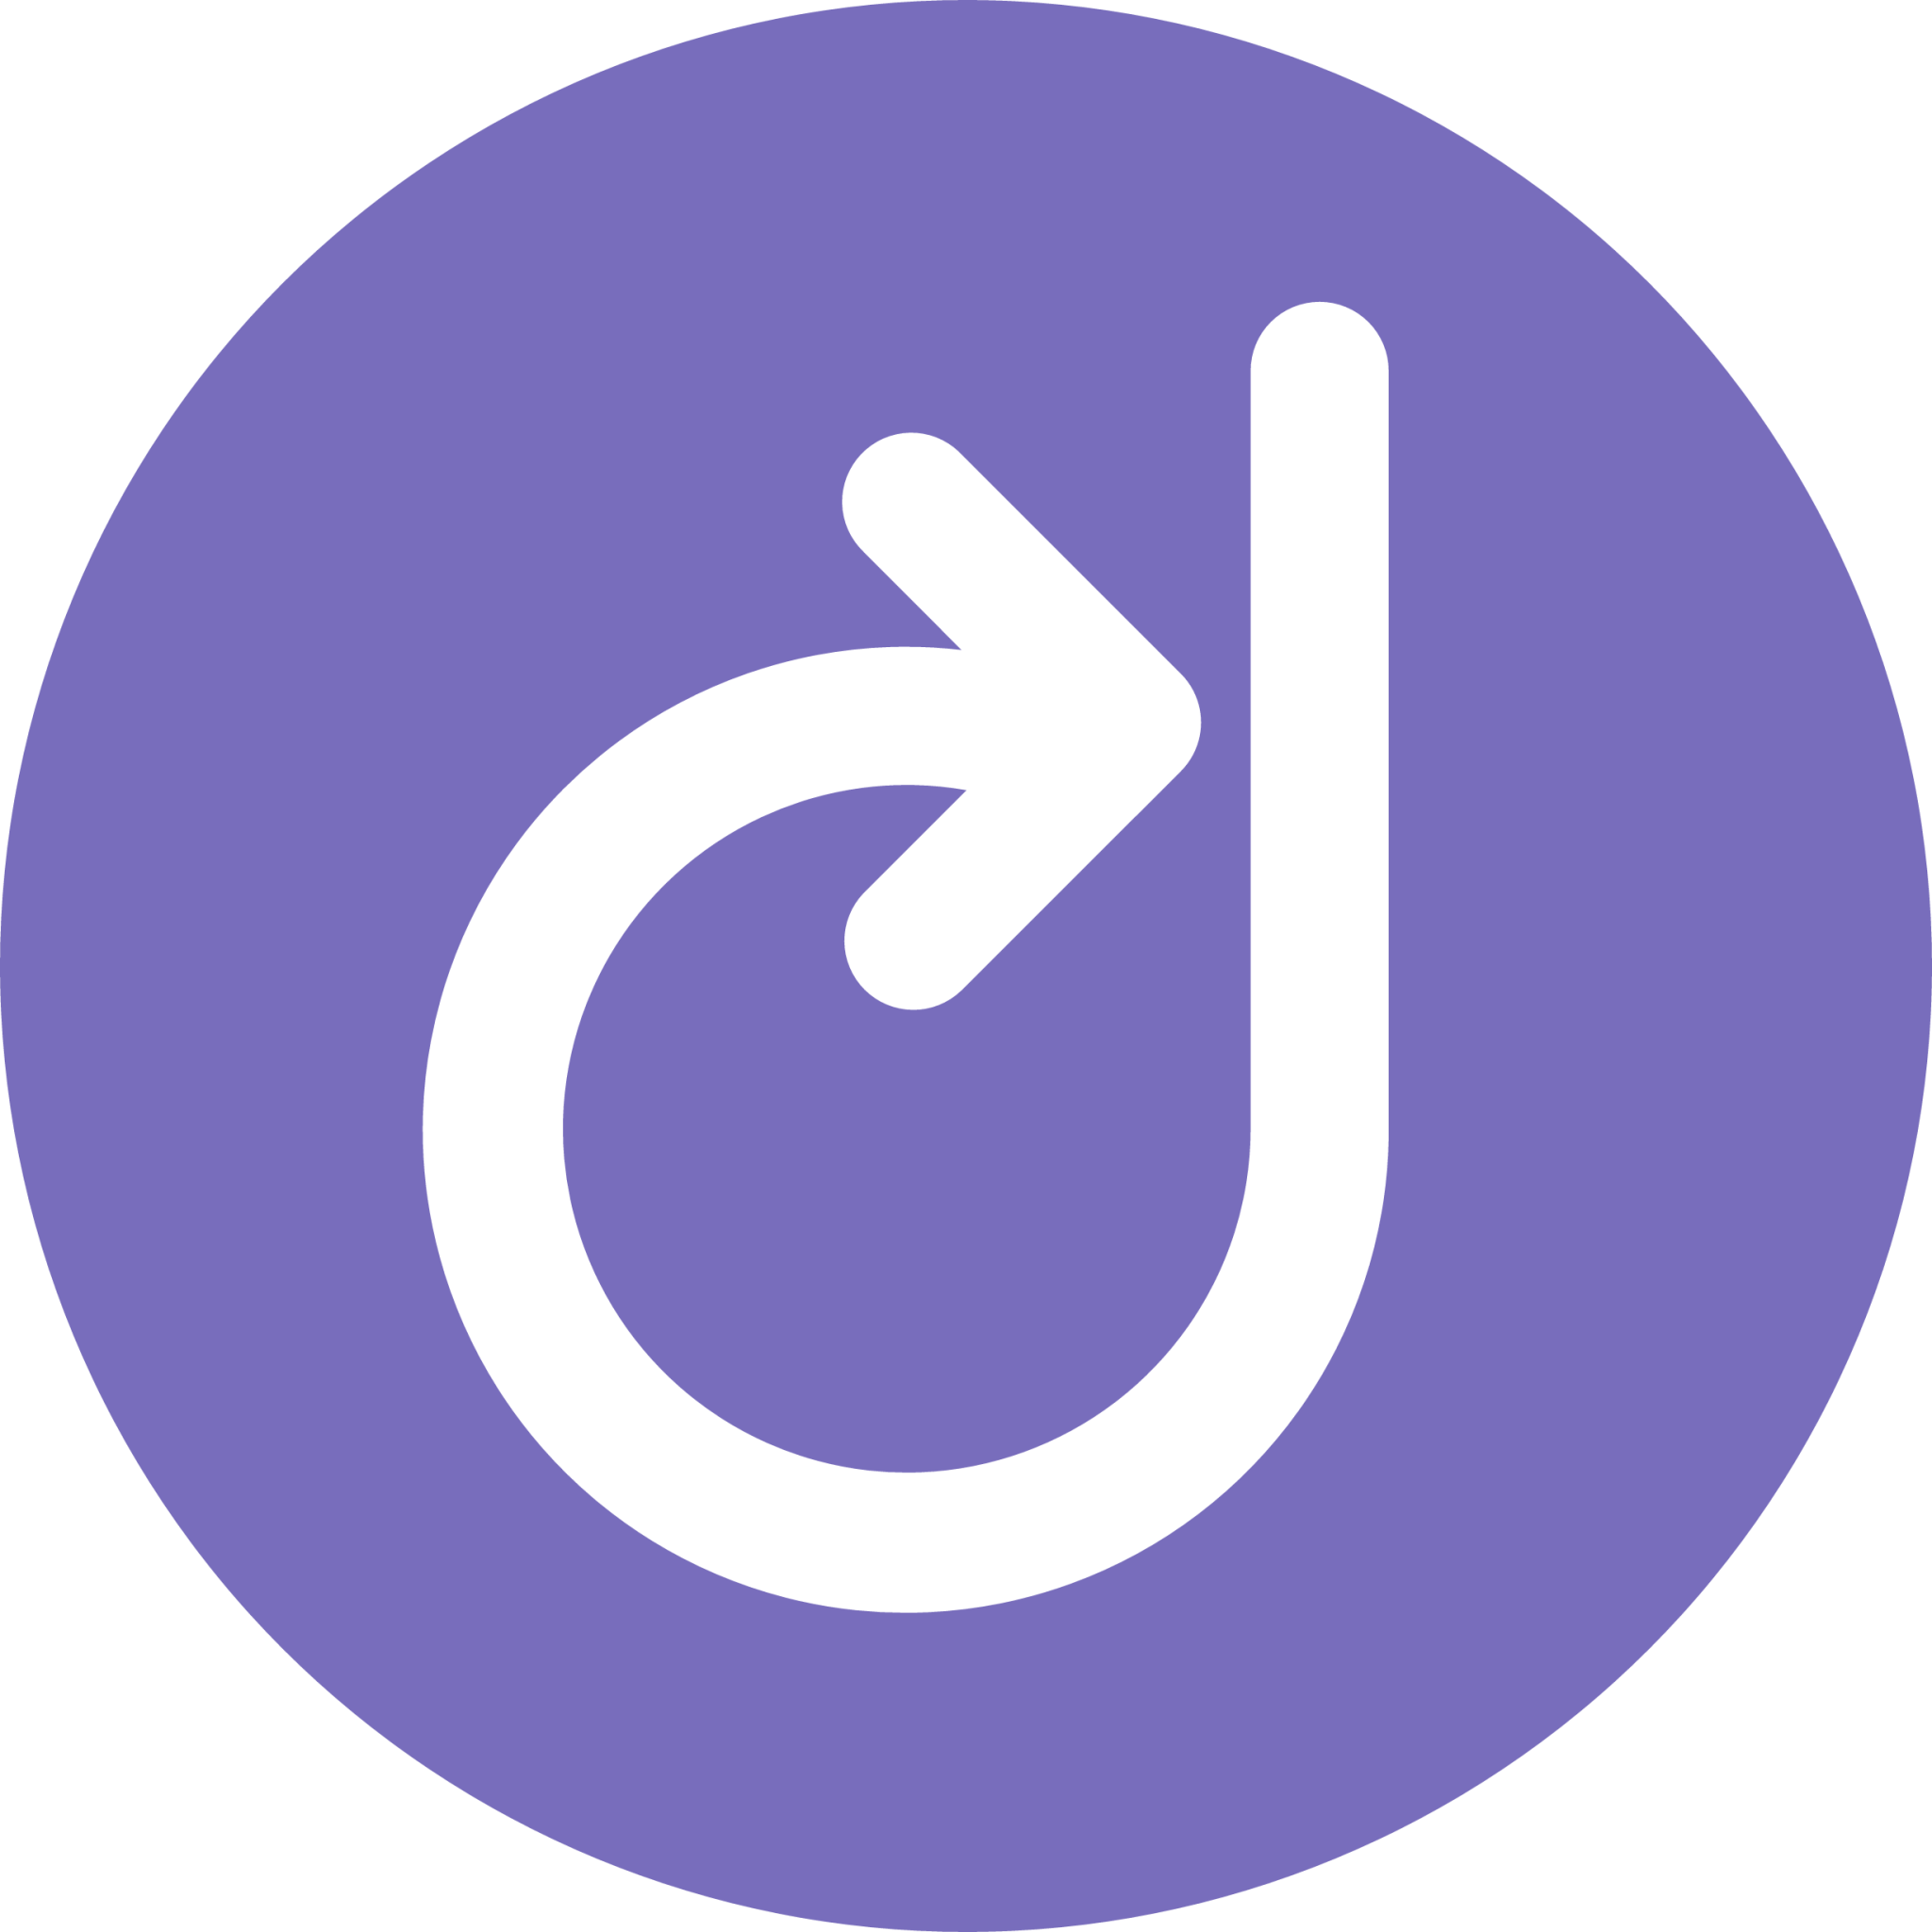 Dock Cryptocurrency icon